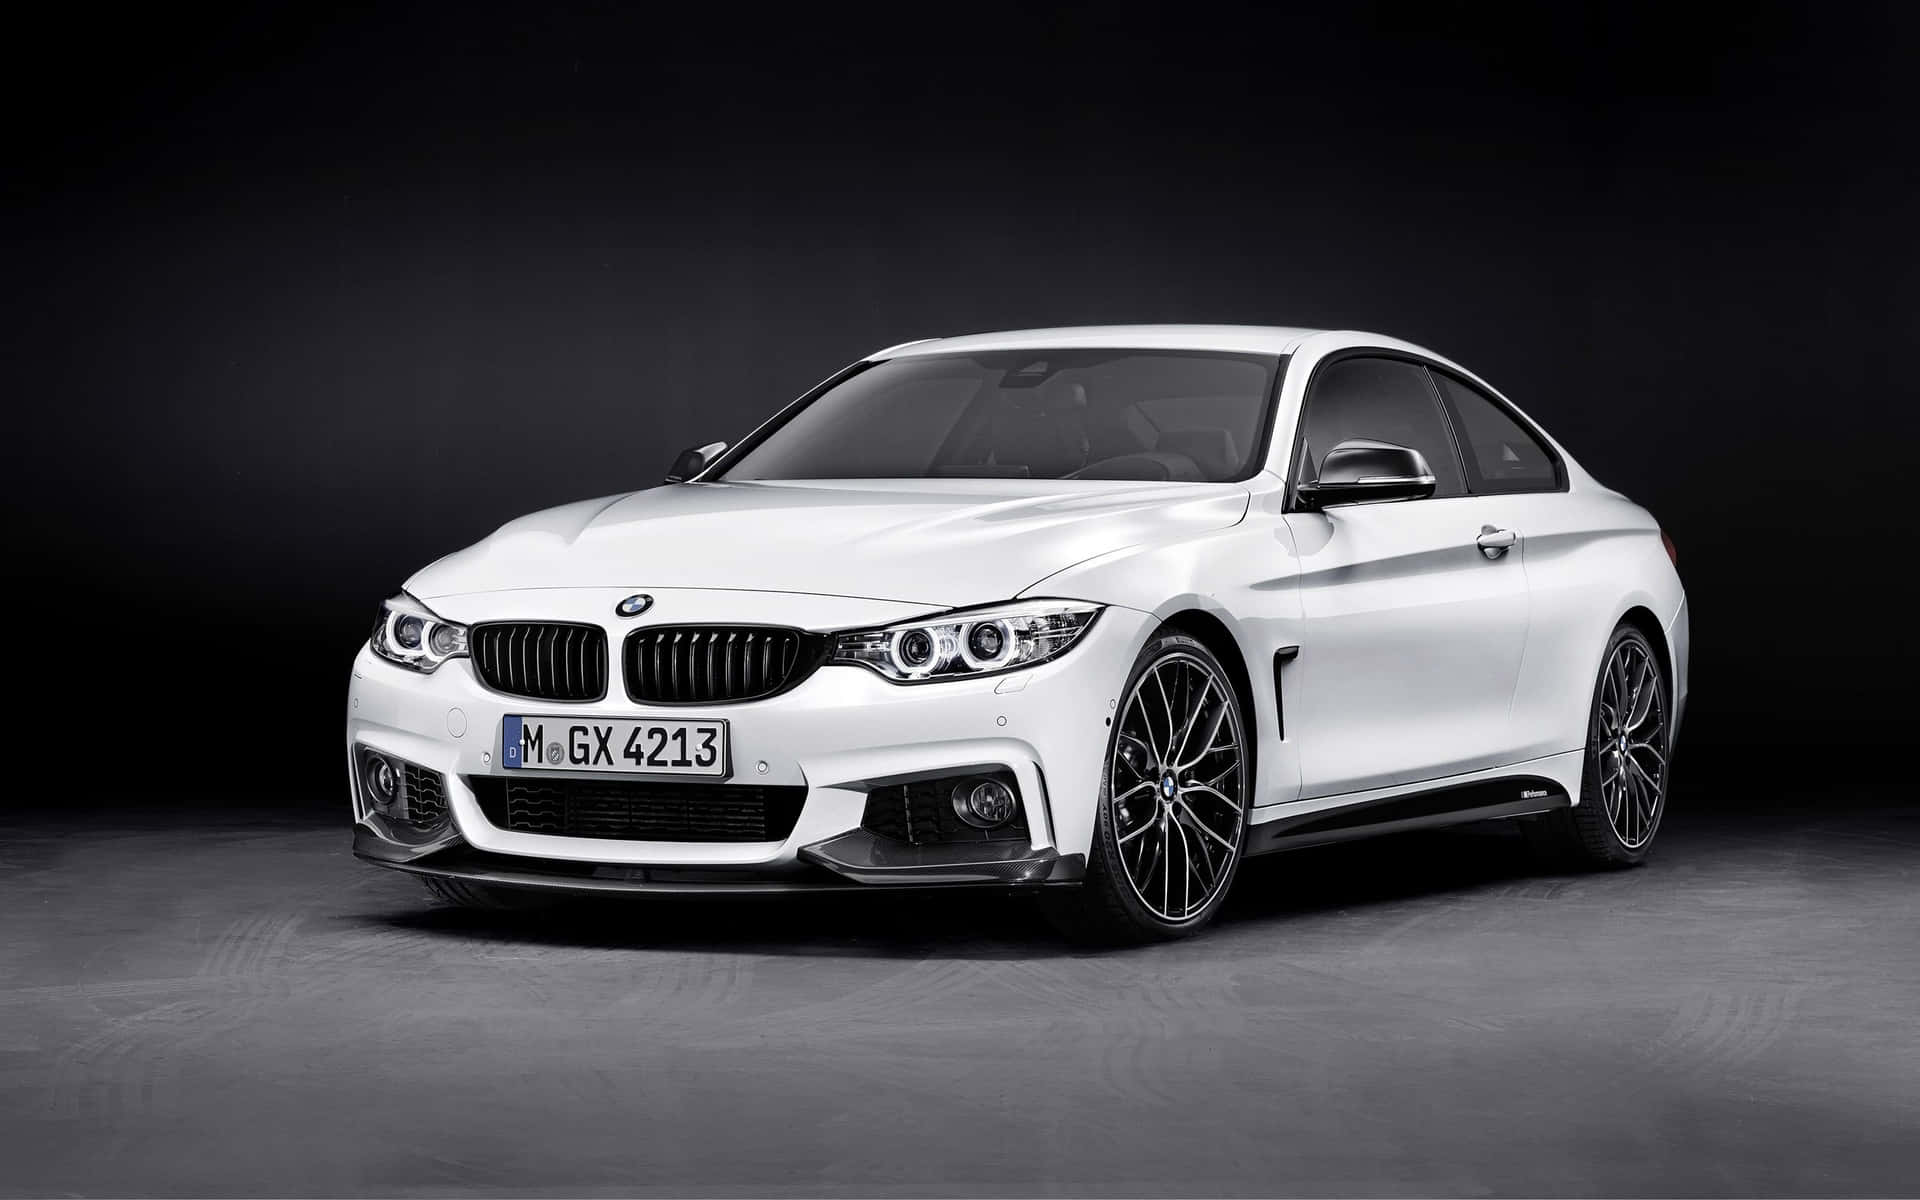 Sleek and Dynamic BMW 4 Series in Action Wallpaper